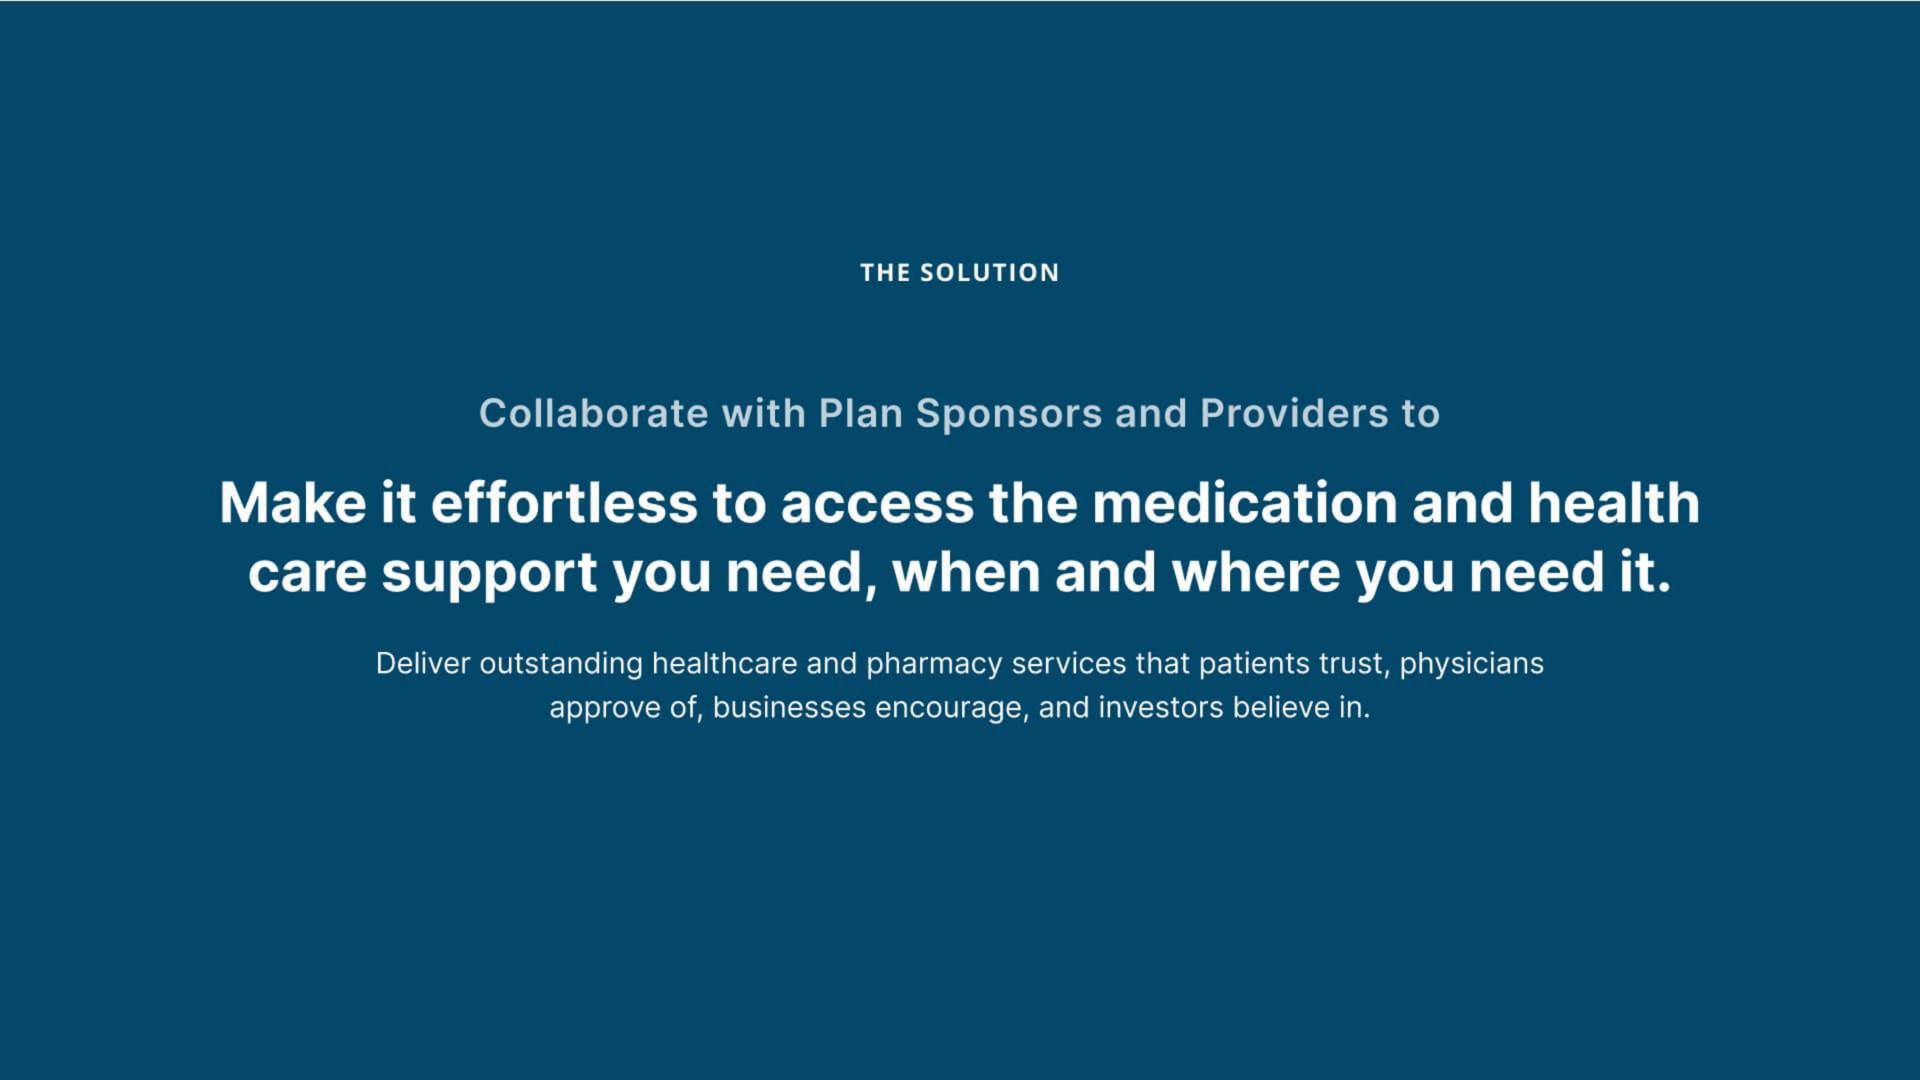 collaborate with plan sponsors and providers to make it effortless to access the medication and health care support you need when and where you need it | Mednow